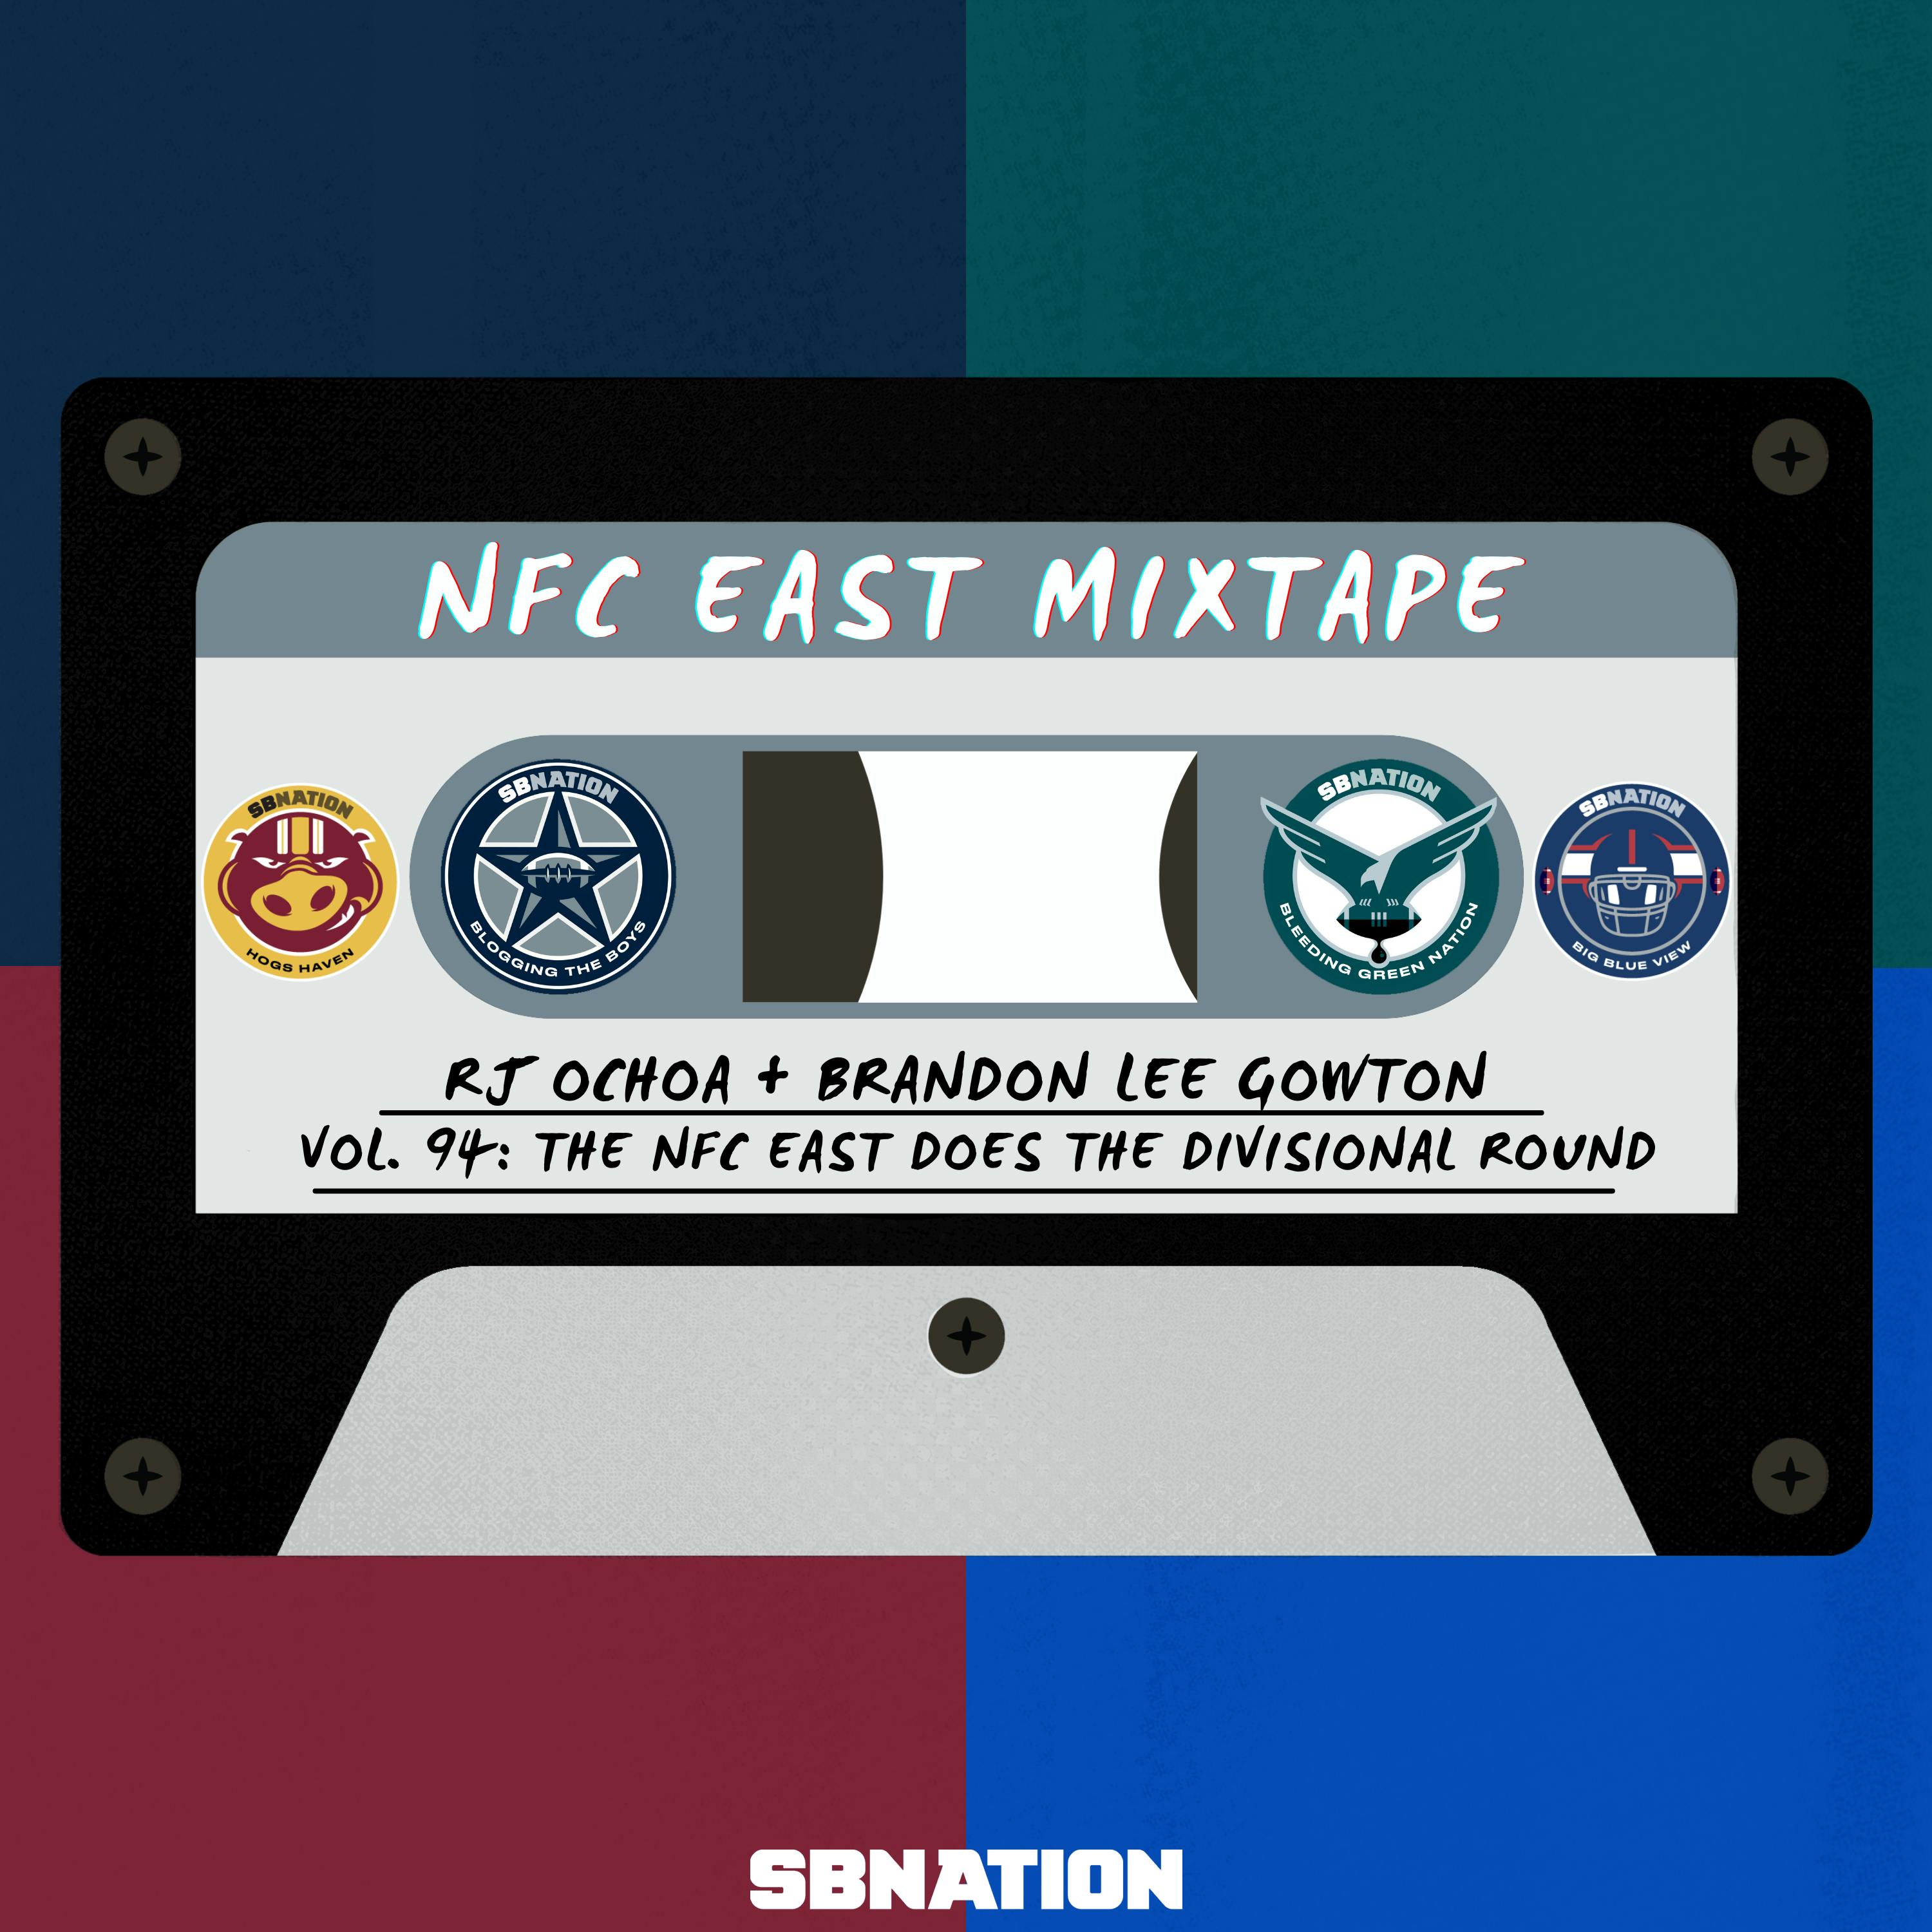 NFC East Mixtape Vol. 94: The NFC East does the Divisional Round